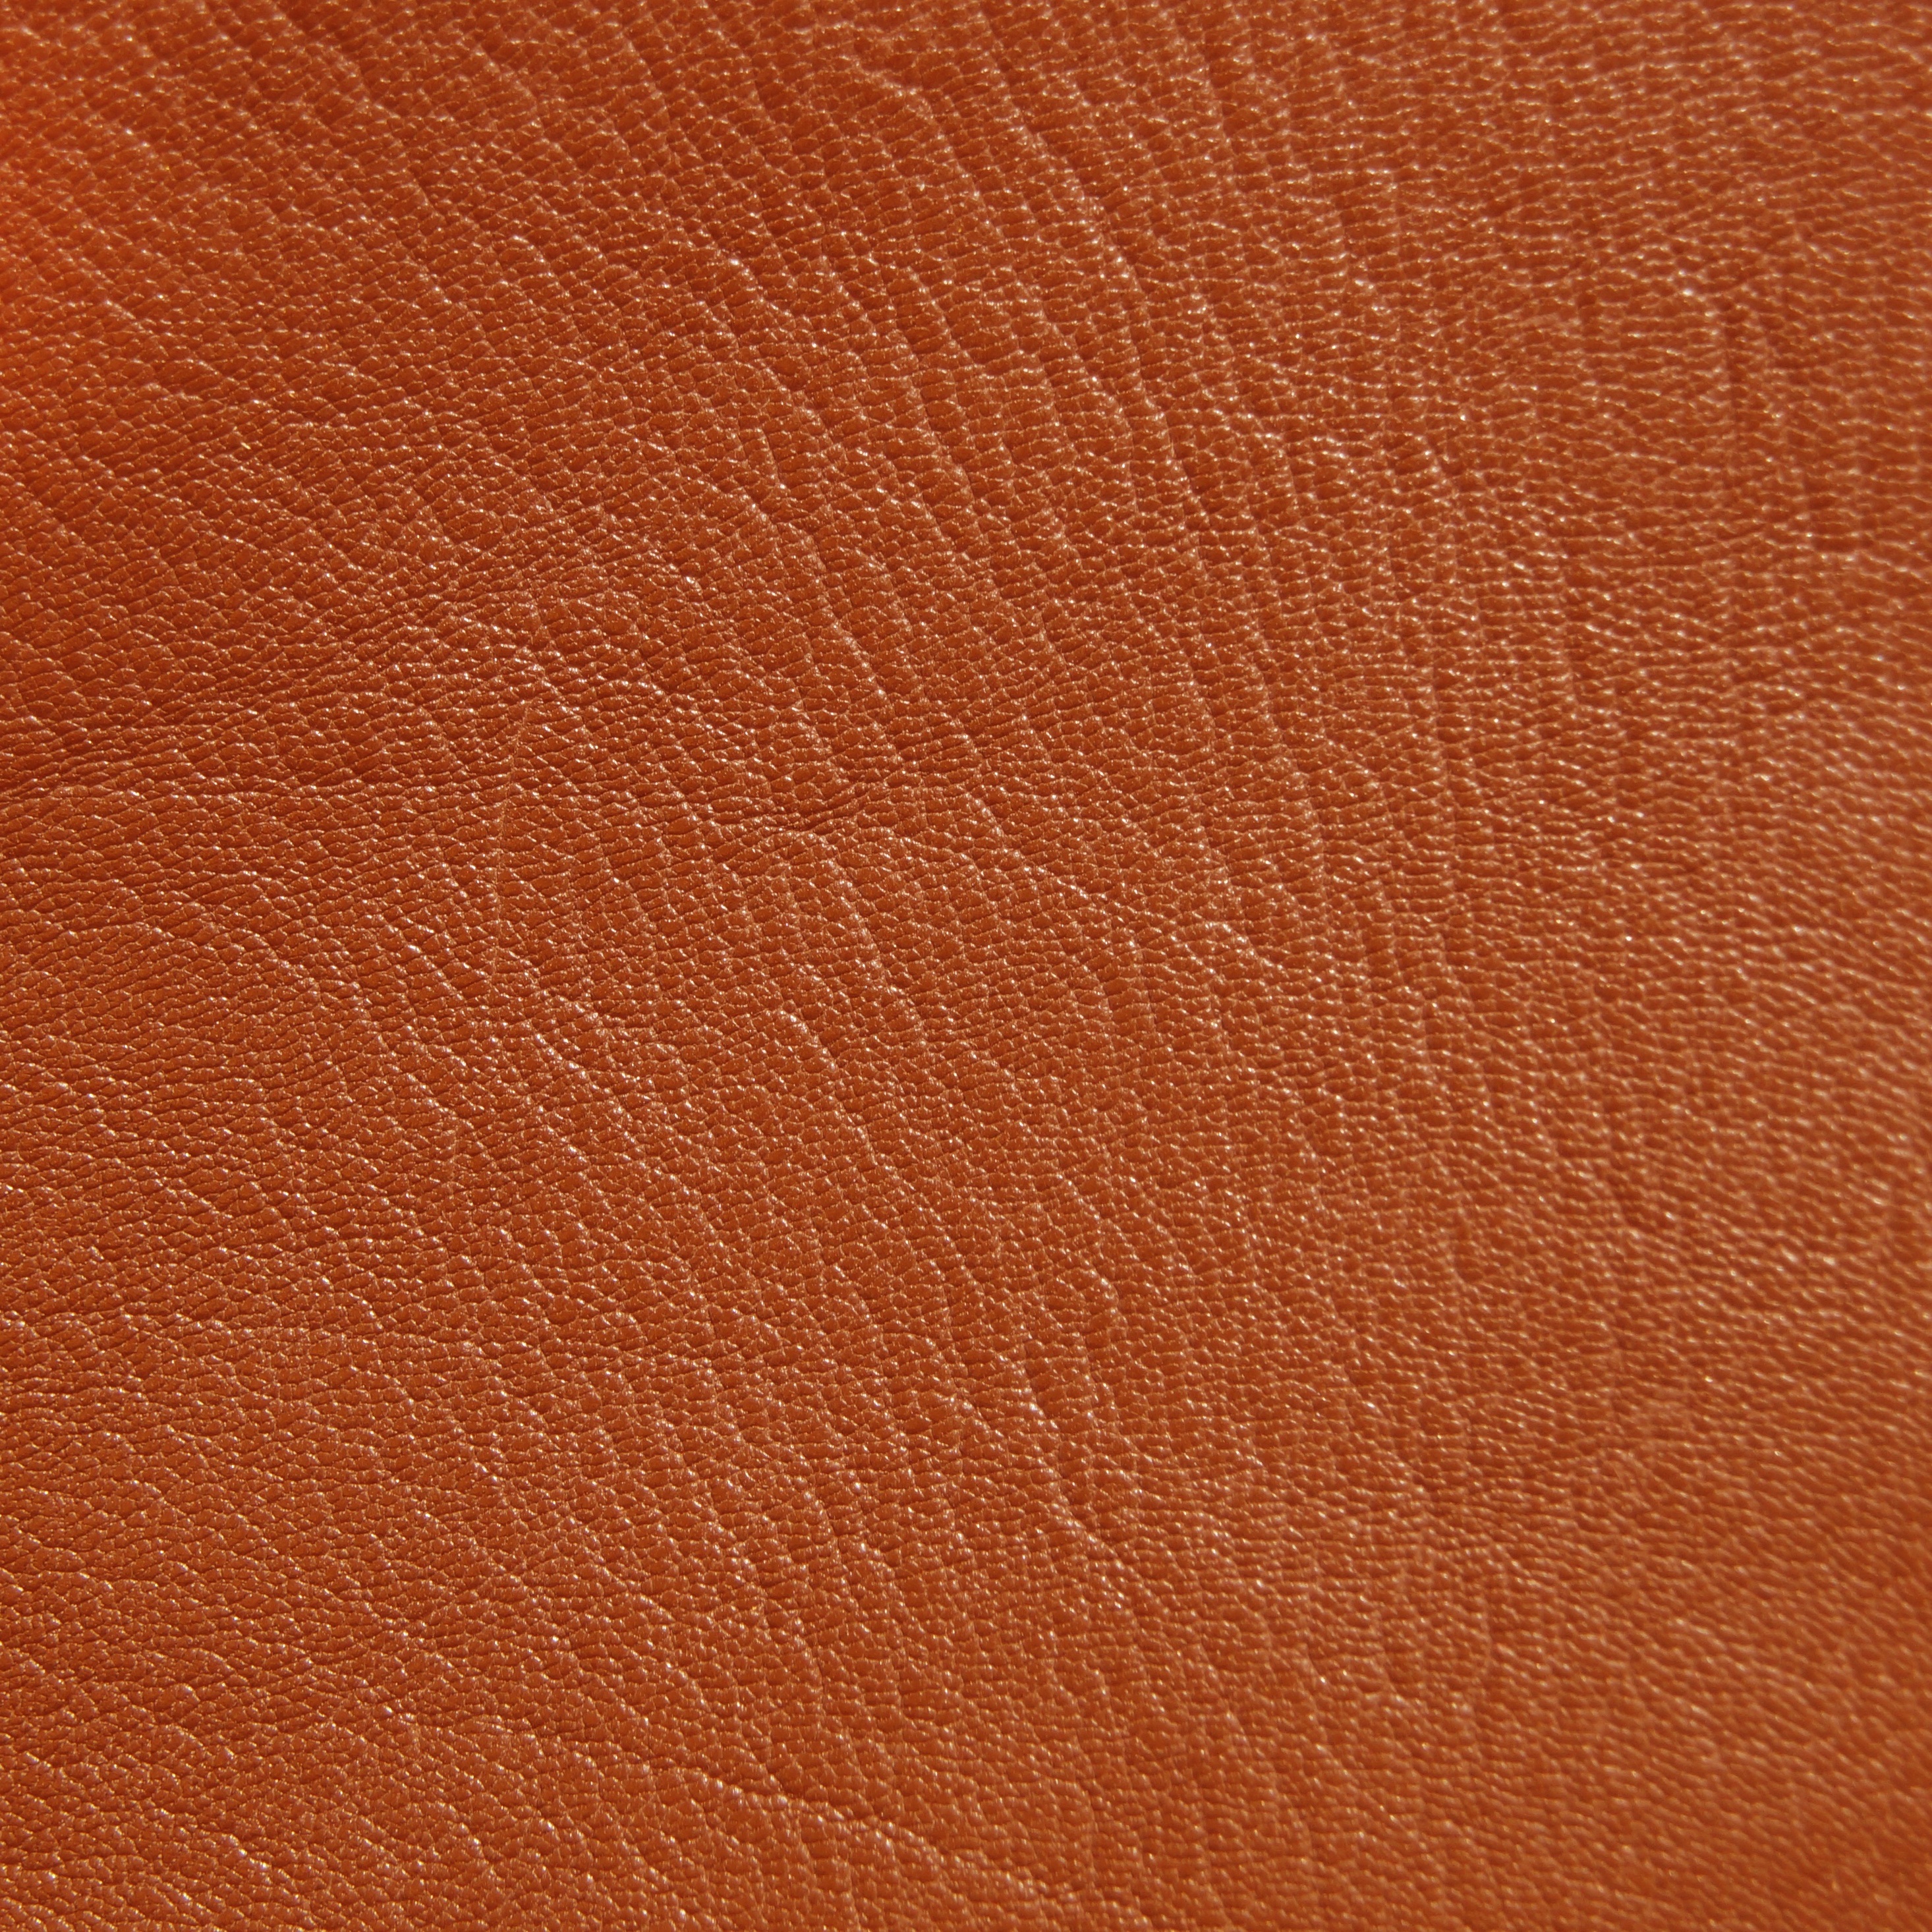 Color Leather Wallpapers - Wallpaper Cave